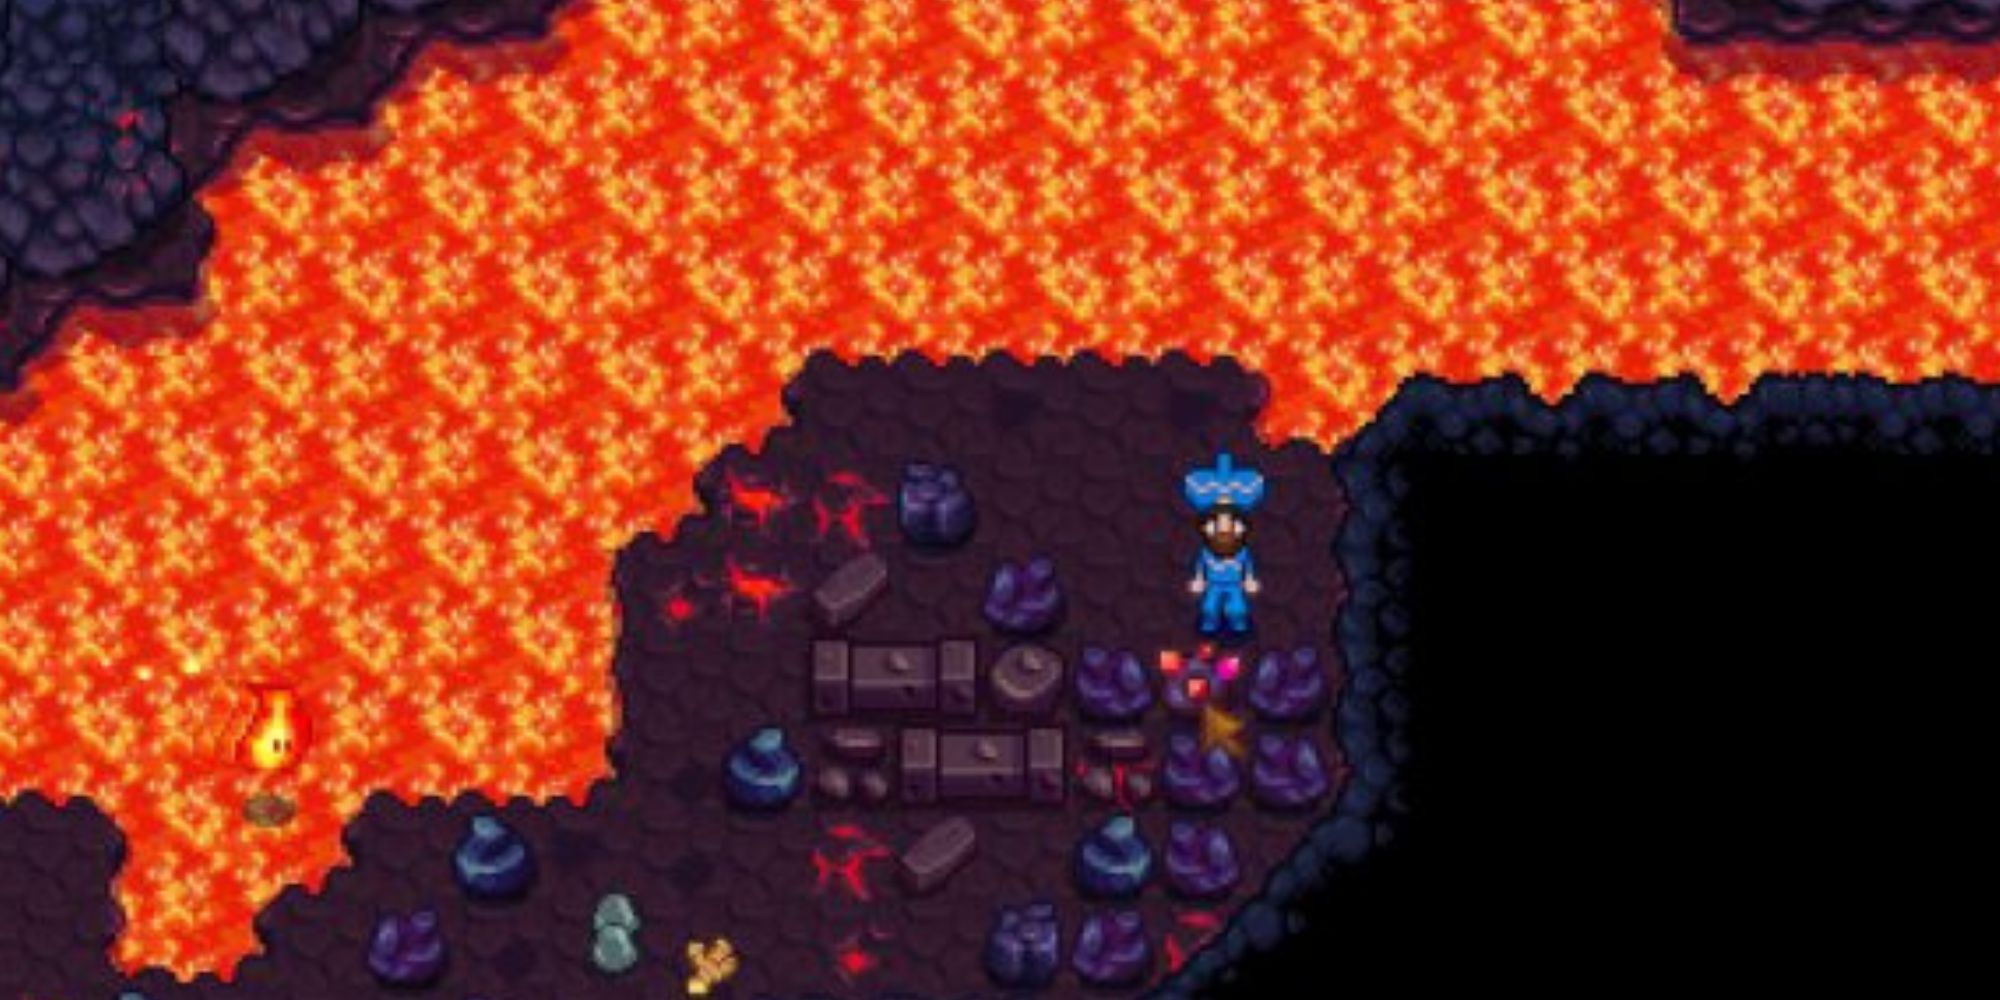 Magma Sparker in Stardew Valley over a pool of lava in the Volcano Dungeon on Ginger Island